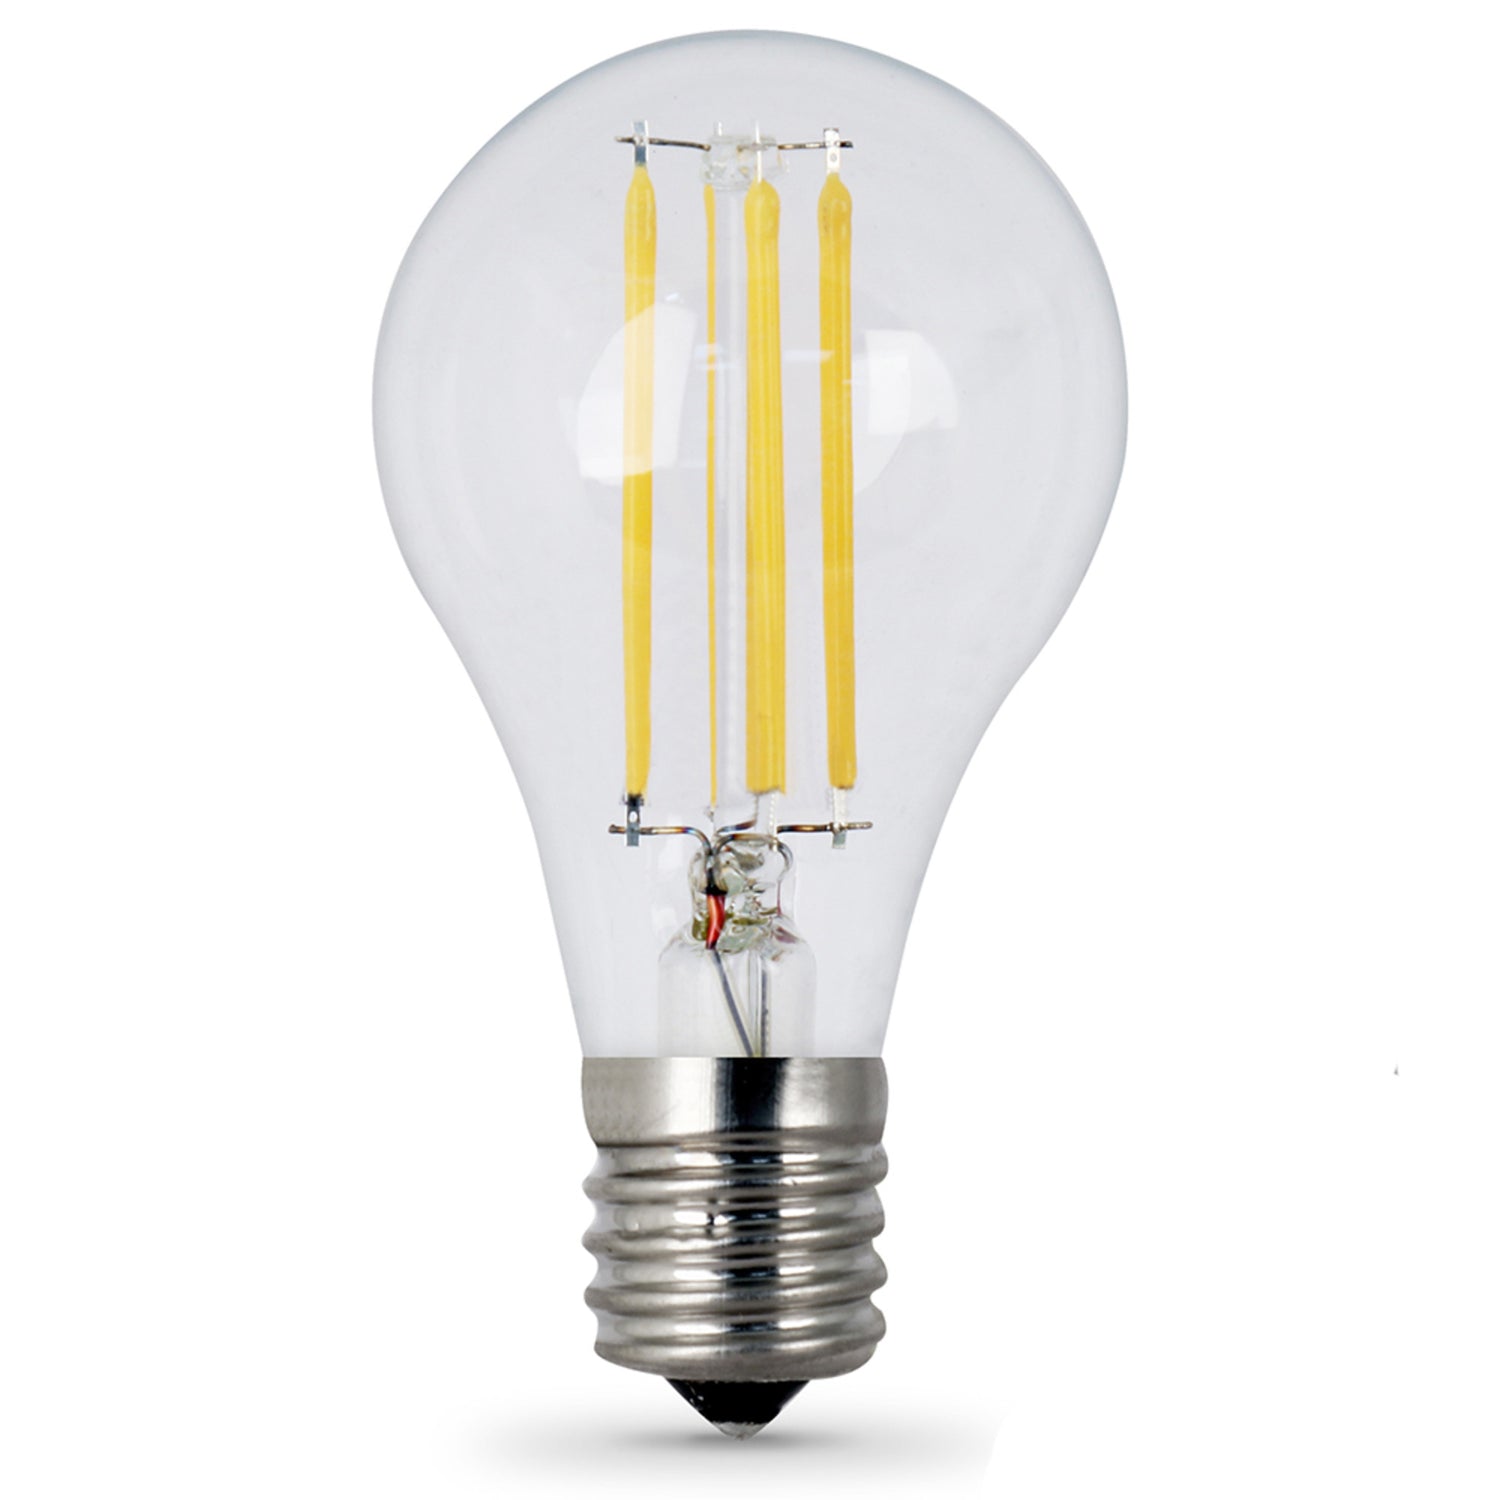 8W (75W Replacement) Daylight (5000K) E26 Base A15 Dimmable Glass Filament LED Light Bulb (2-Pack)